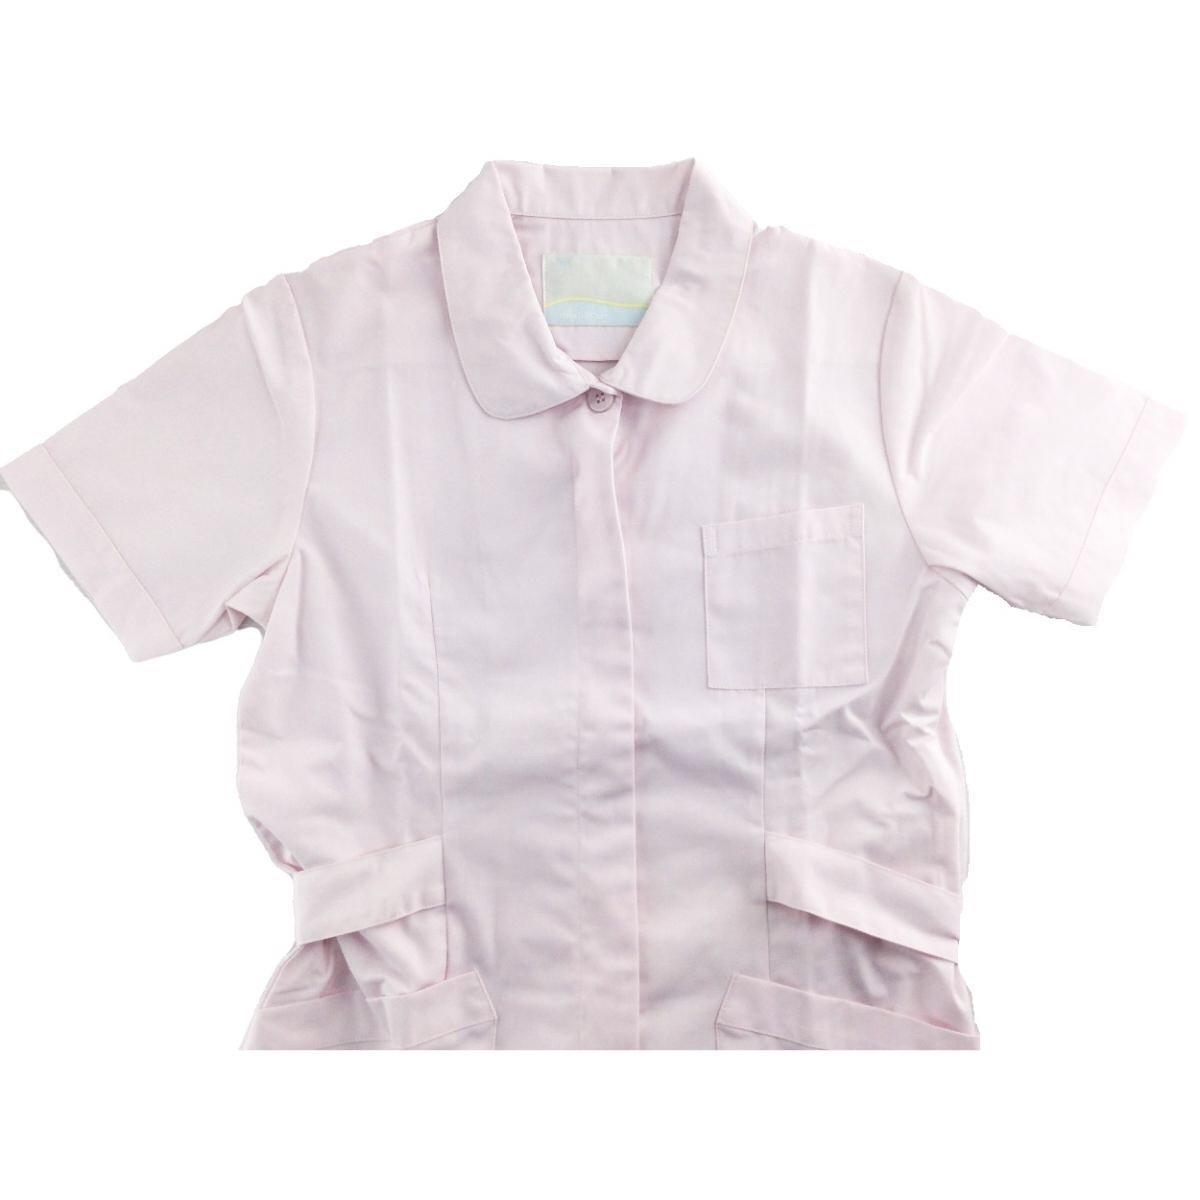  One-piece Broad short sleeves nursing . cotton . material wrinkle becoming difficult nursing . nursing .LL size pink postage 250 jpy 